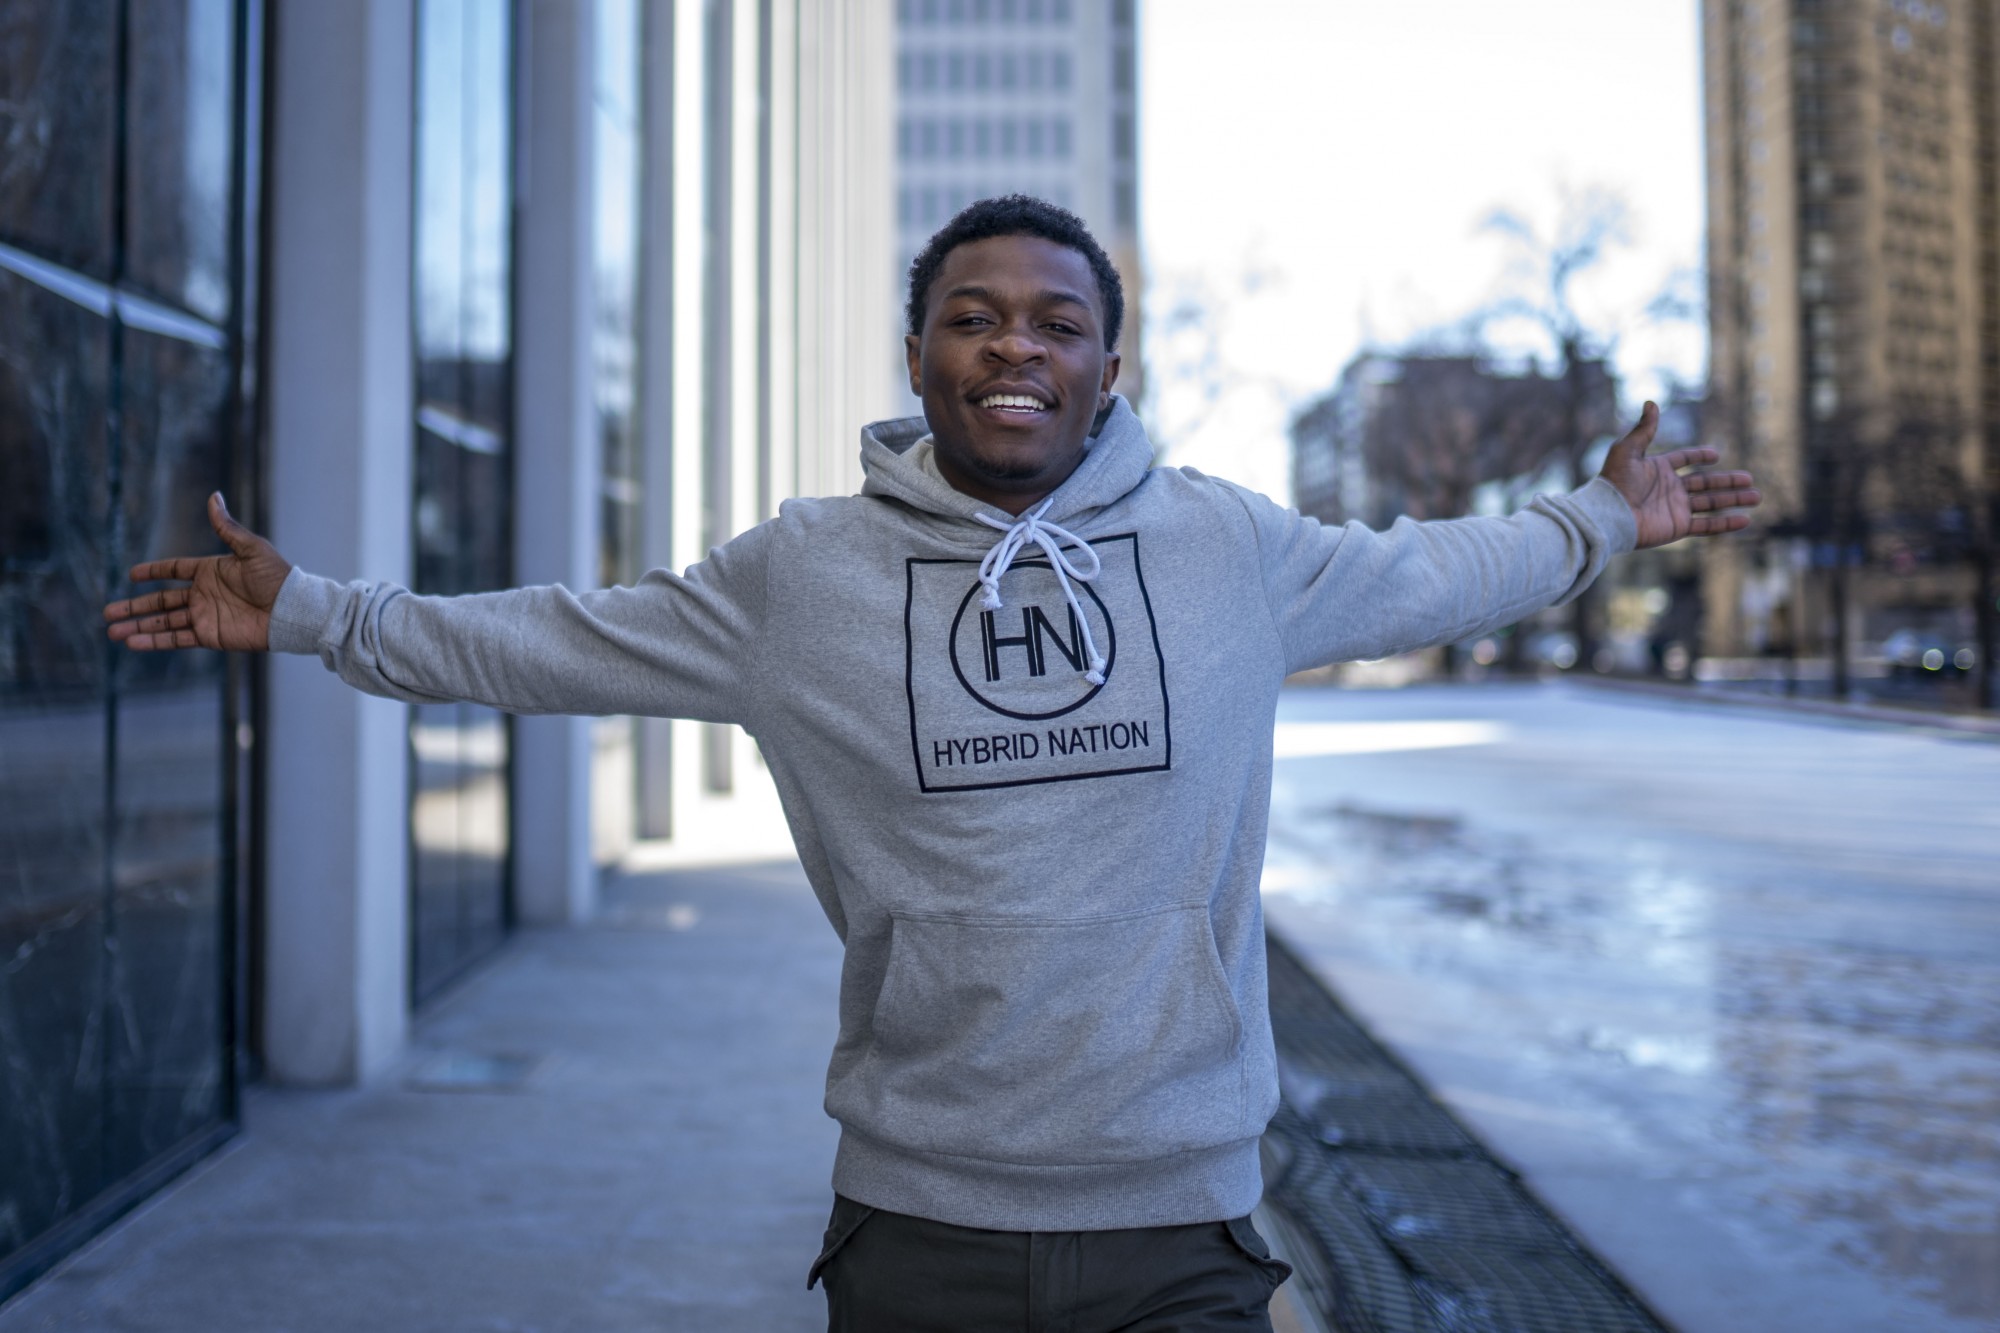 Bayo Idowu poses for a portrait in downtown Minneapolis on Sunday, Feb. 23. Idowu says “Call me selfish but I want it to be everywhere. It’s not about me, it’s about the message.”